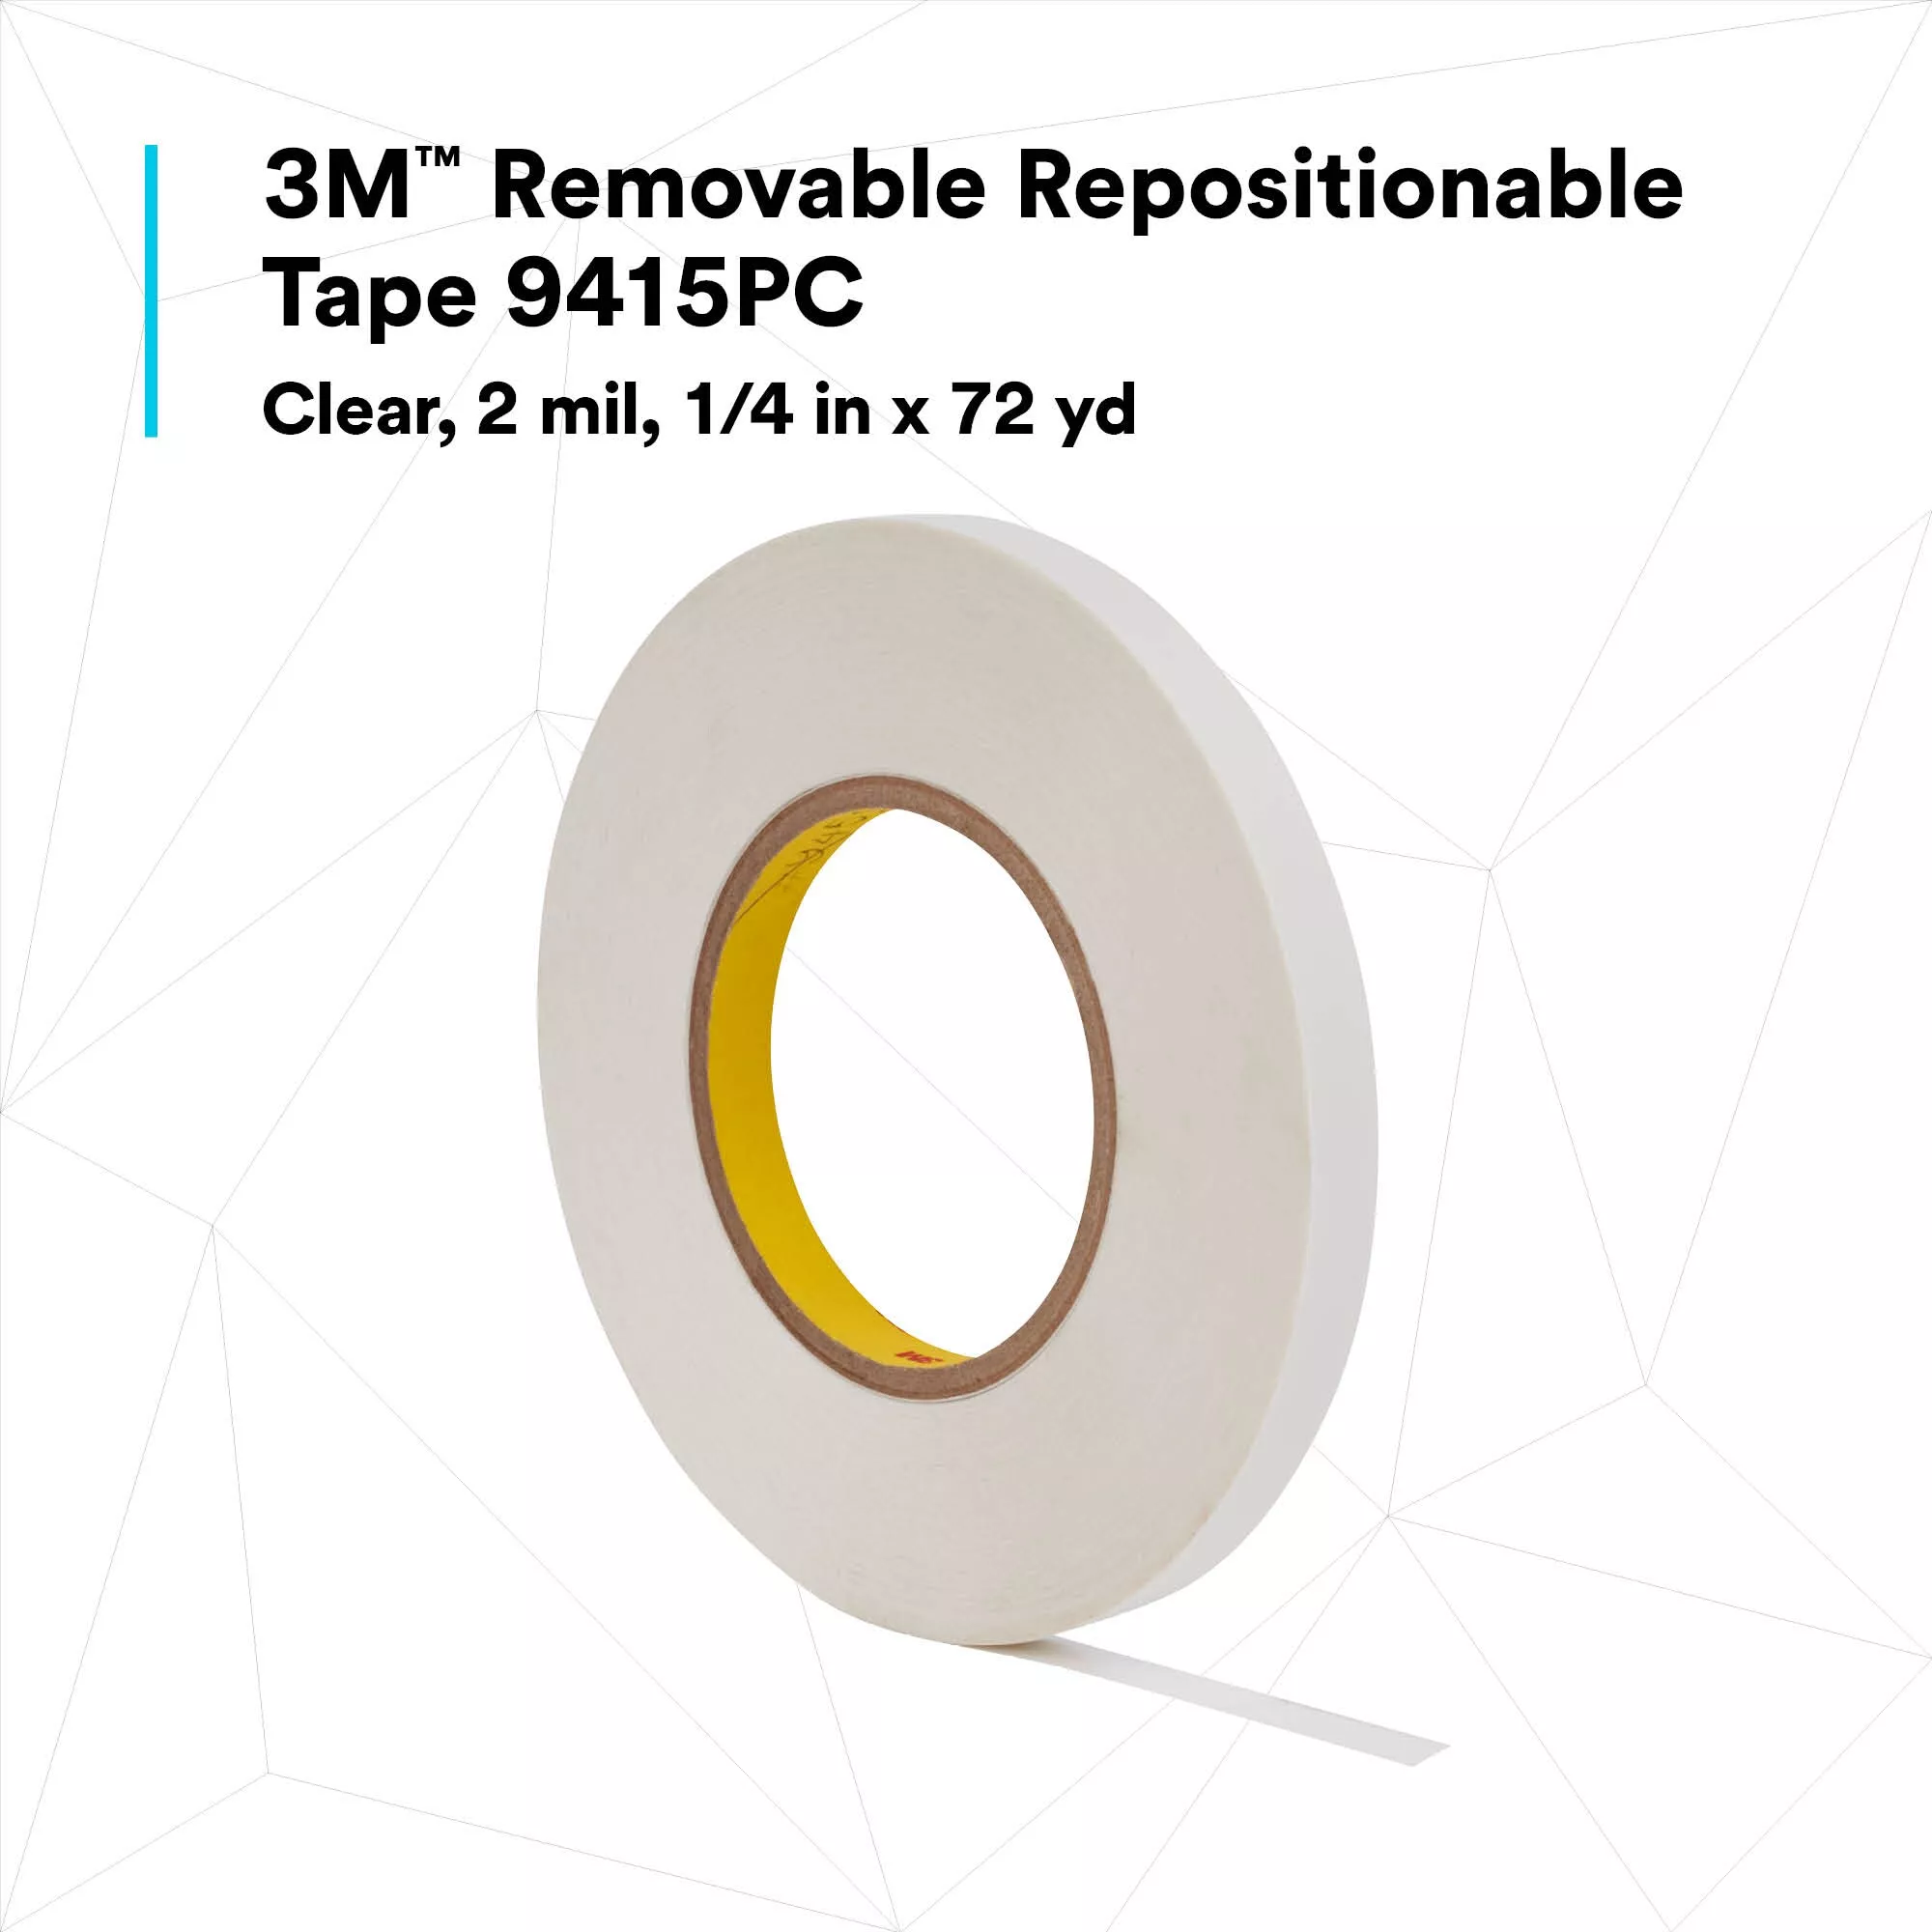 Product Number 9415PC | 3M™ Removable Repositionable Tape 9415PC